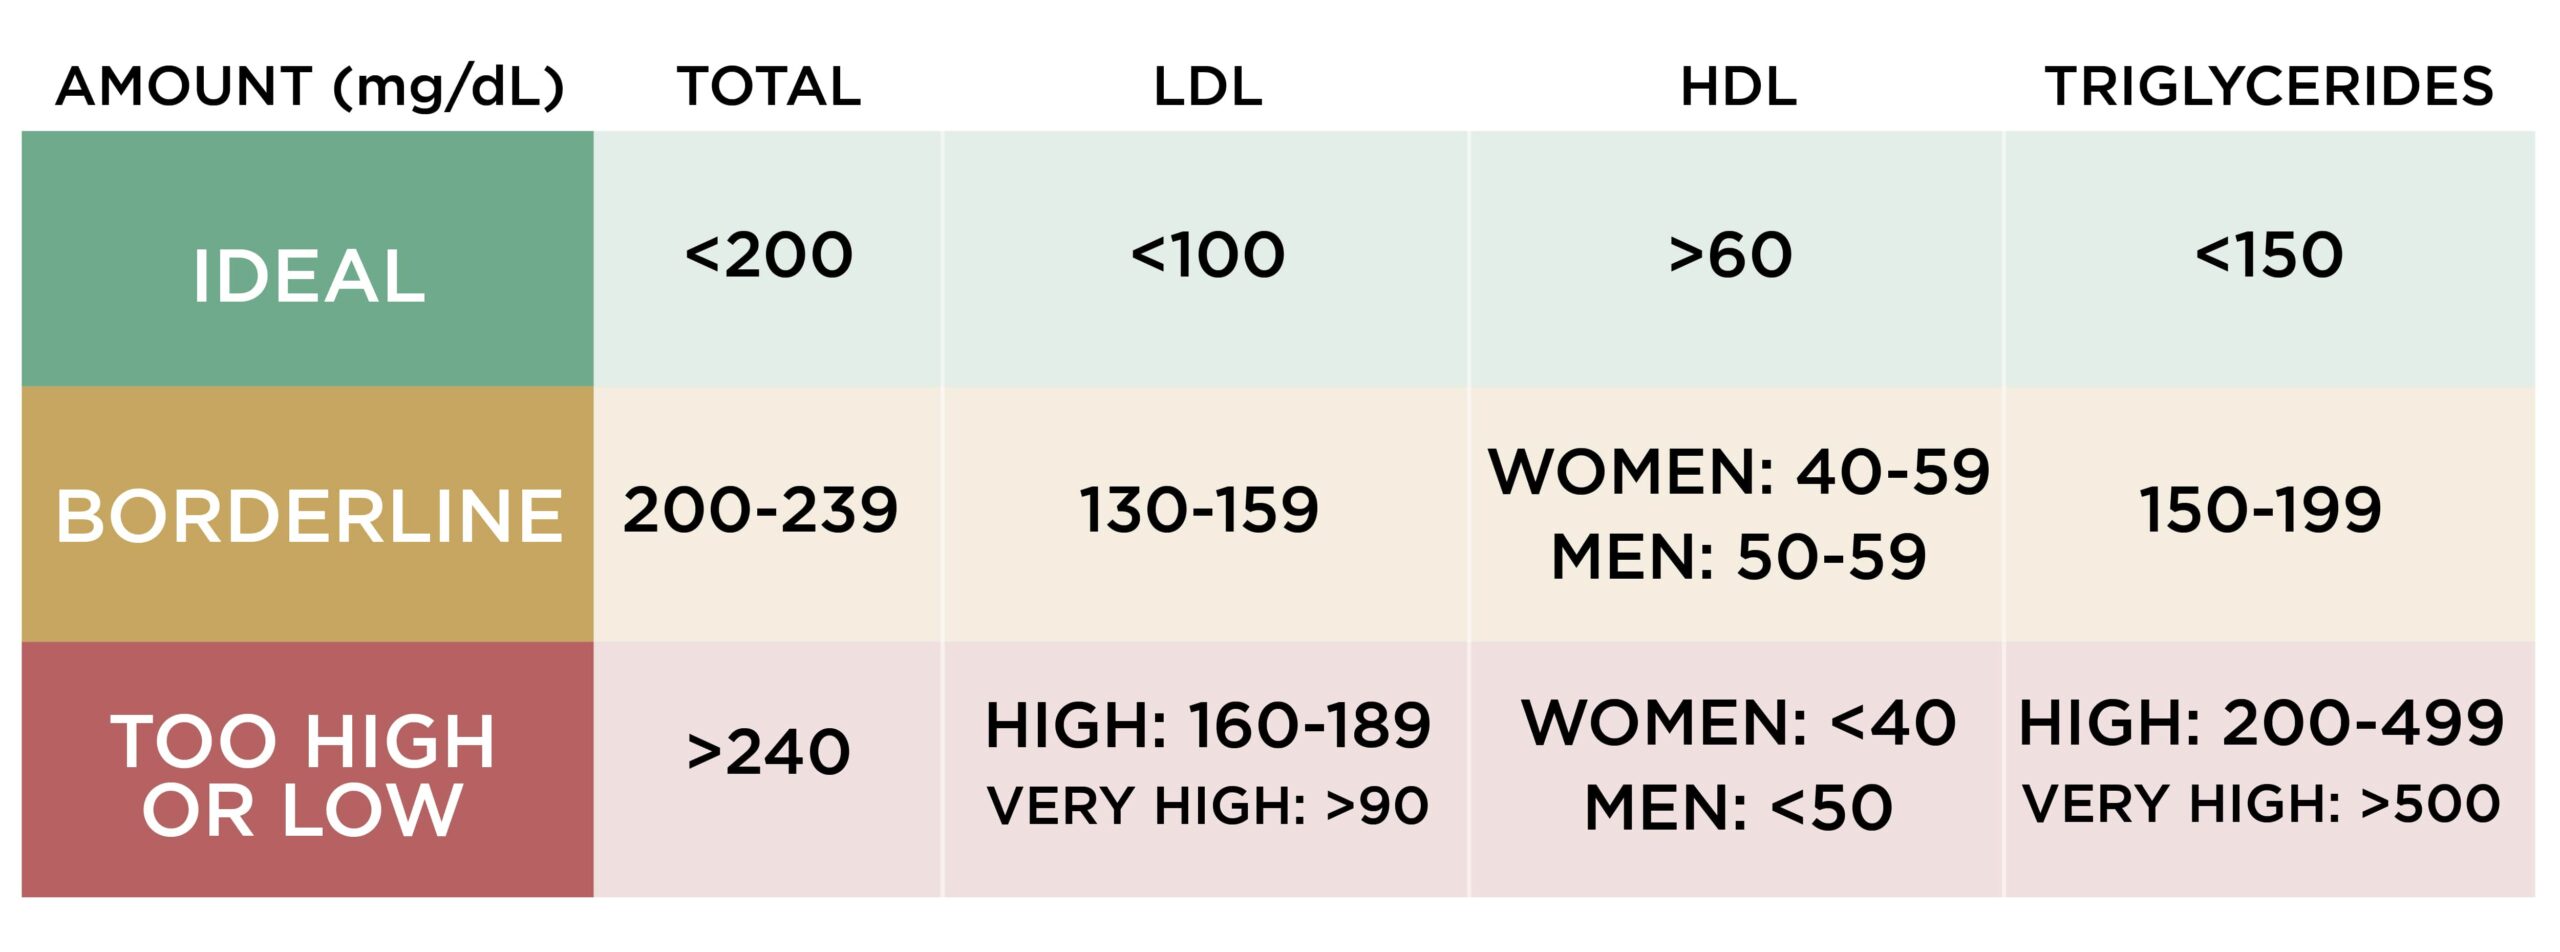 Cholesterol levels in adults chart